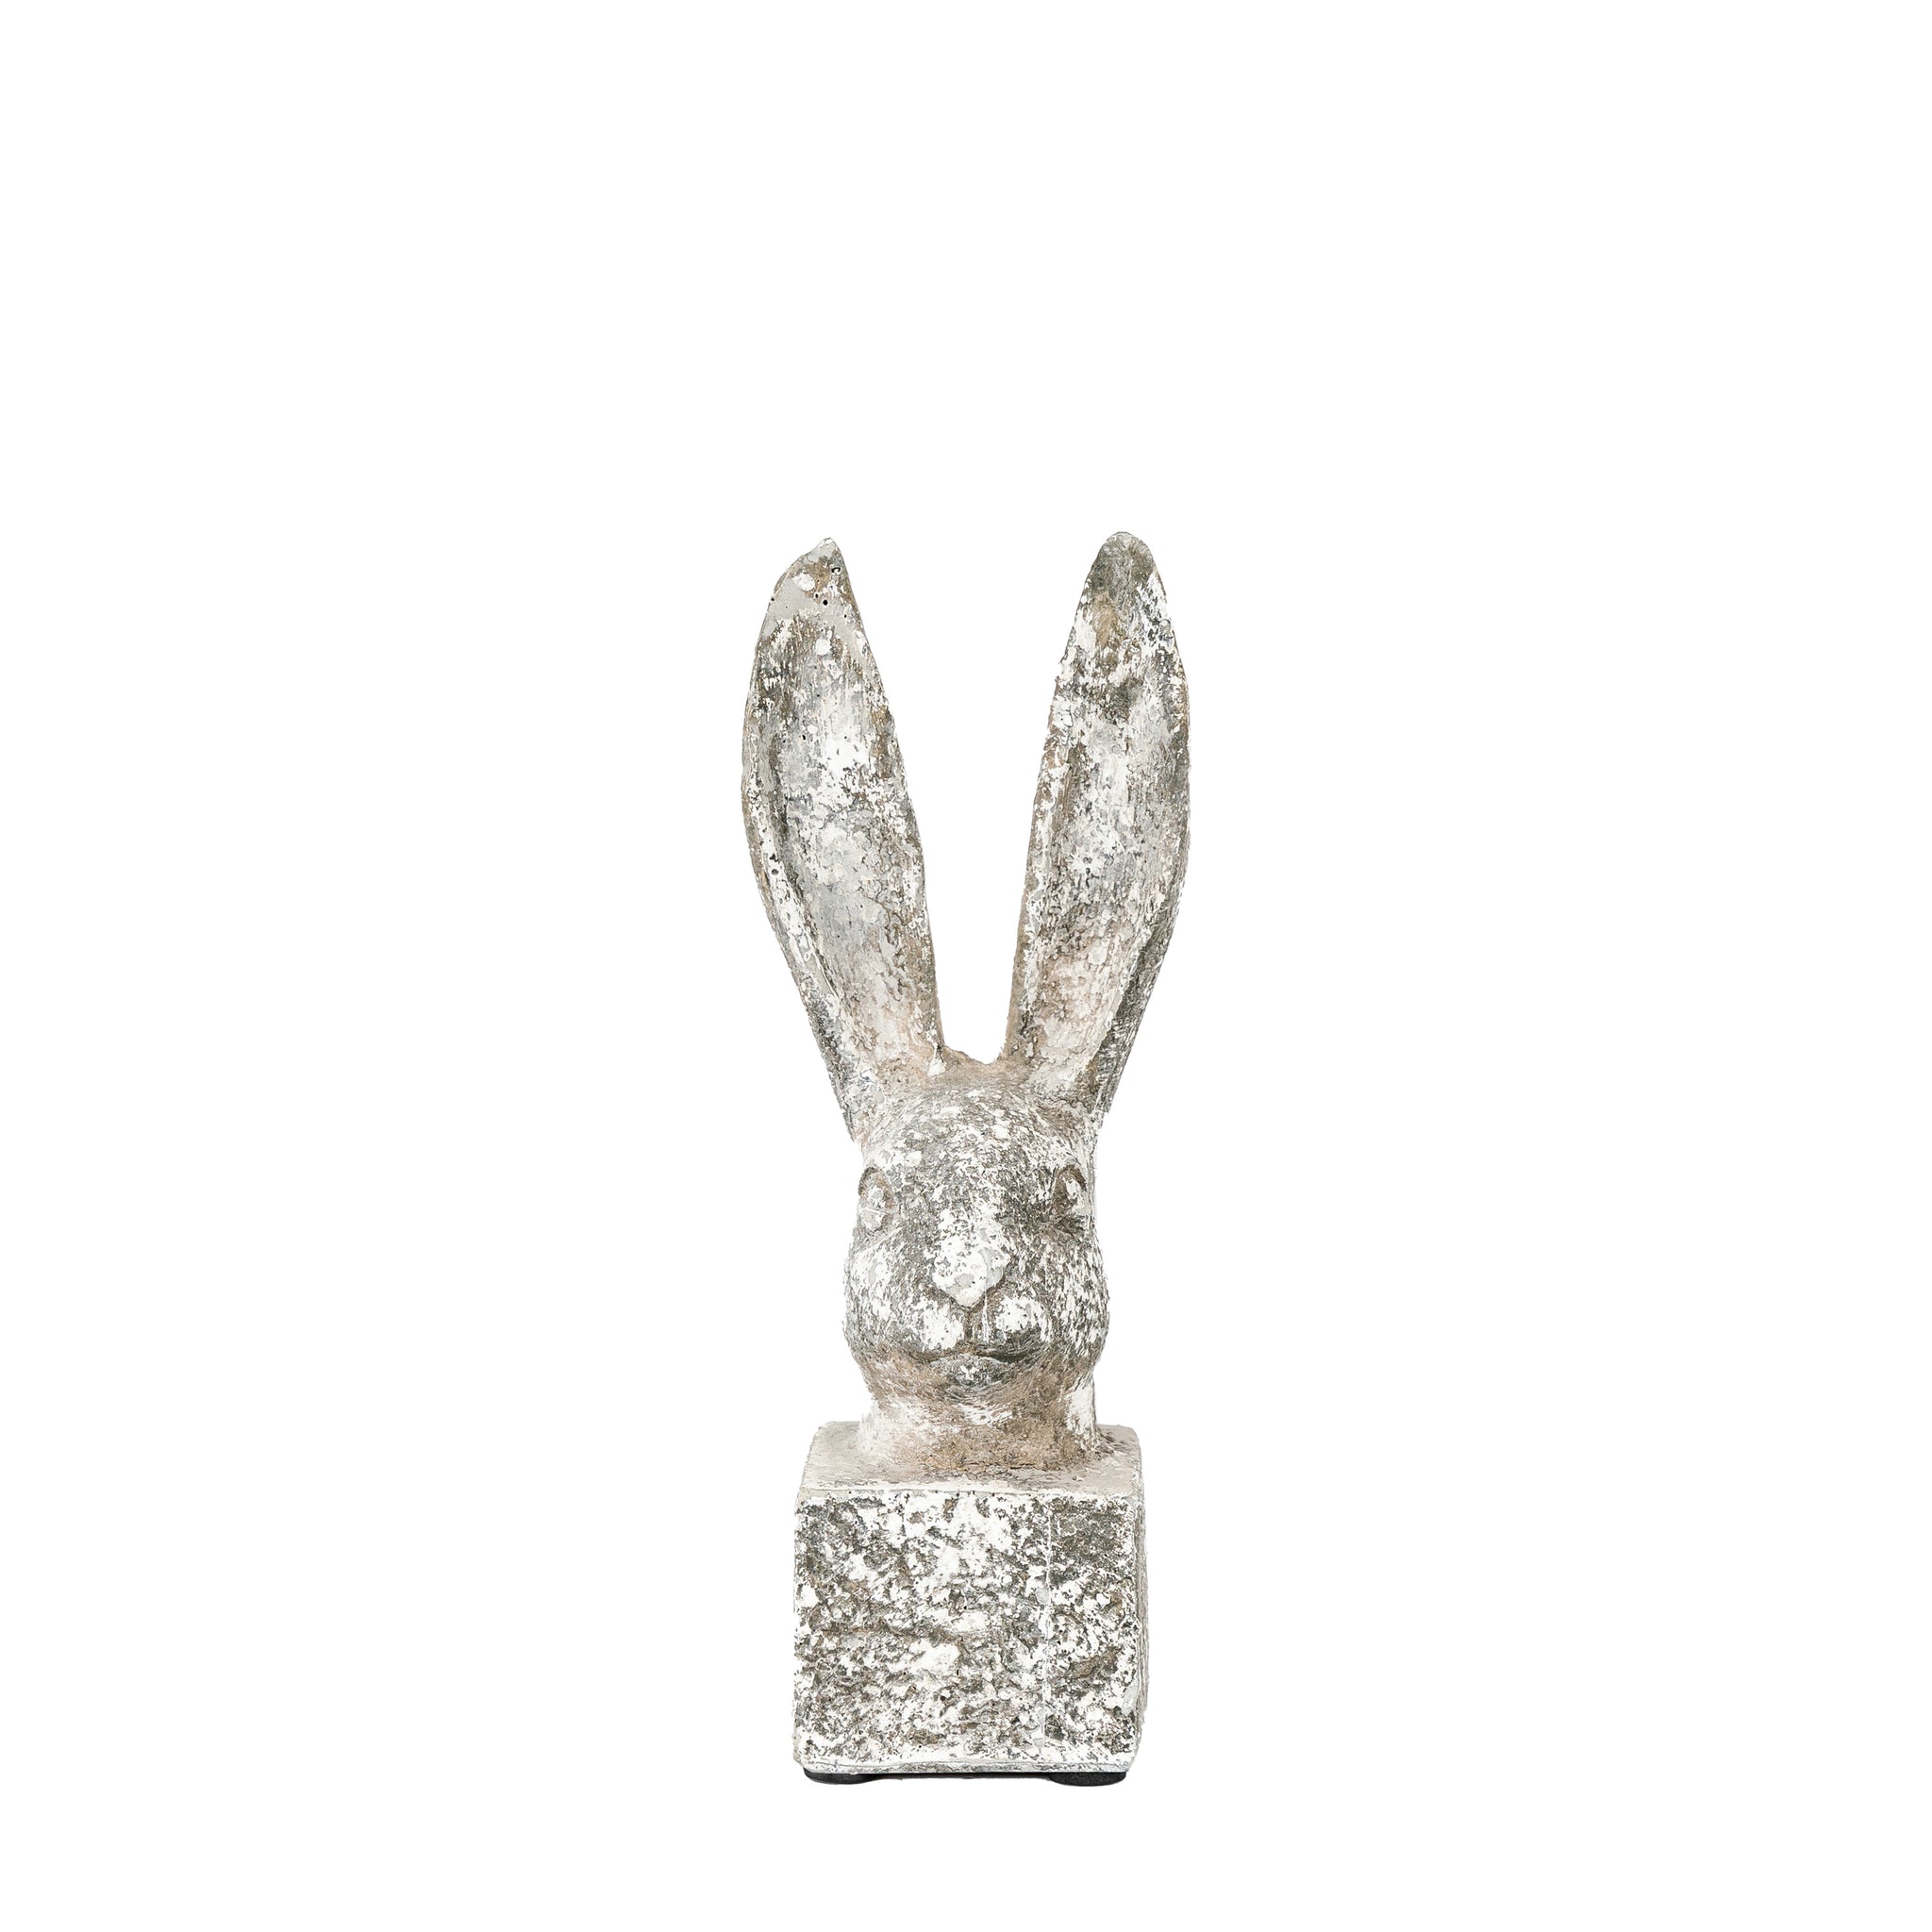 Harris Hare Small Distressed White